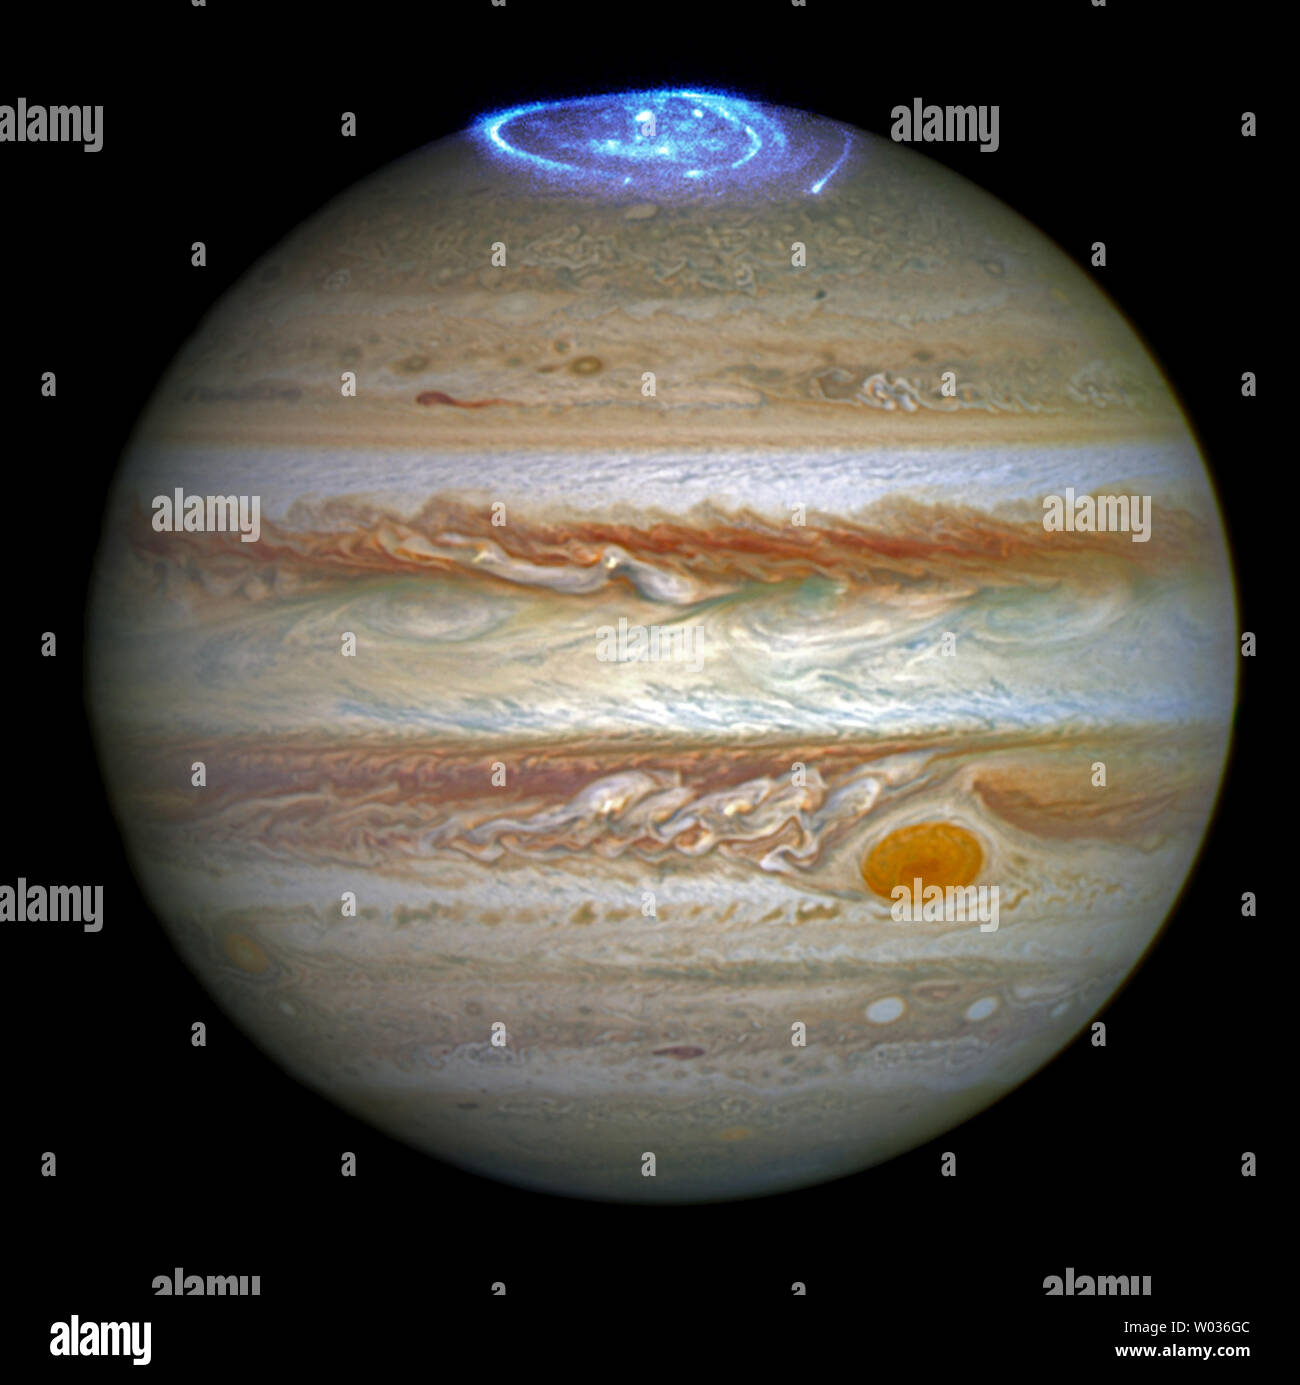 This image, released on June 30, 2016, shows a series of vivid auroras in Jupiter's atmosphere. Astronomers are using NASA's Hubble Space Telescope to study auroras stunning light shows in a planet's atmosphere on the poles of the largest planet in the solar system, Jupiter. The auroras were photographed during a series of Hubble Space Telescope Imaging Spectrograph far-ultraviolet-light observations taking place as NASA's Juno spacecraft approaches and enters into orbit around Jupiter. NASA/UPI Stock Photo